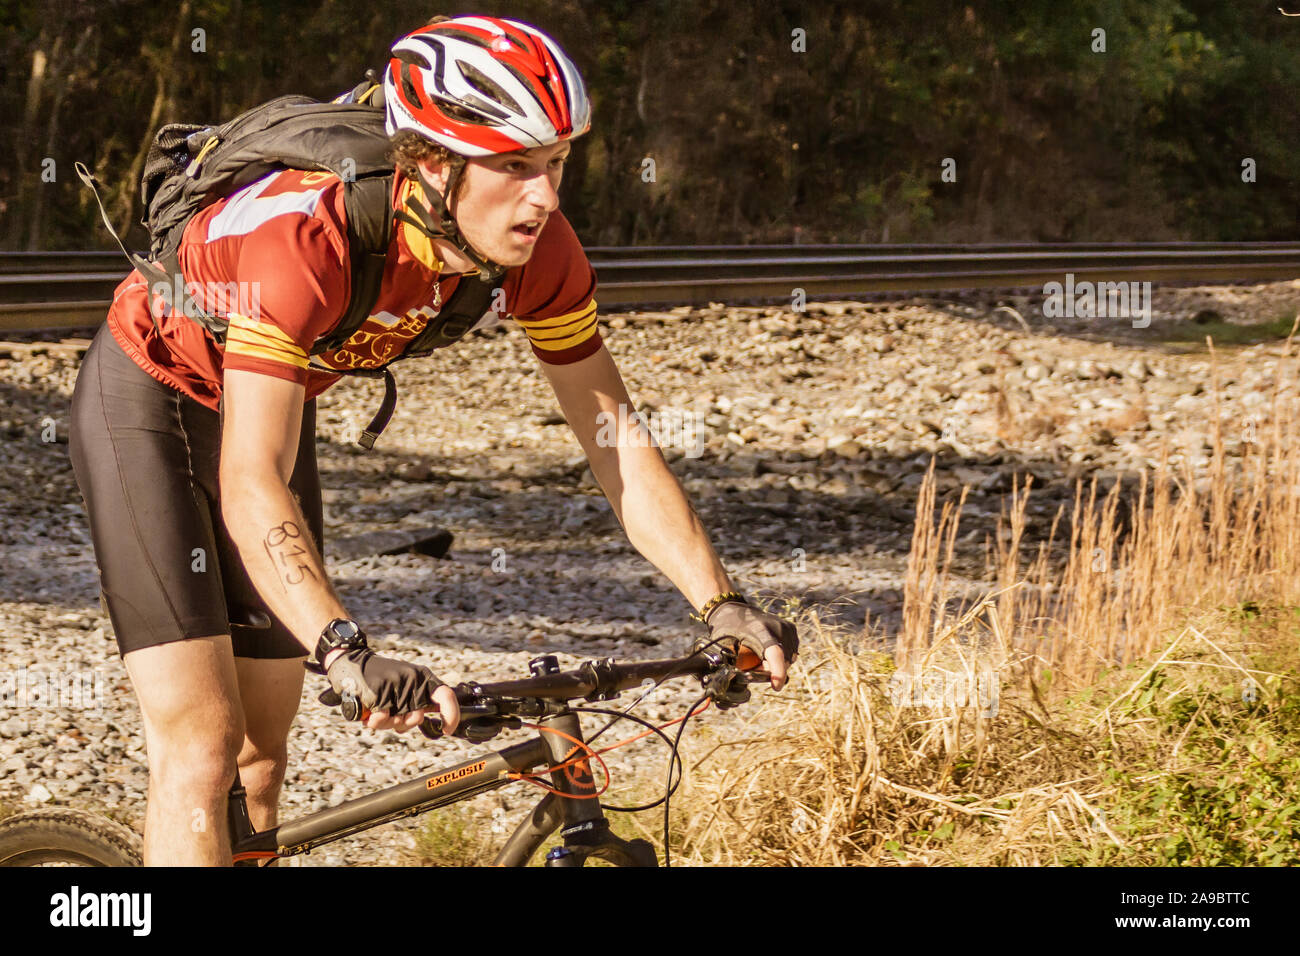 Cyclist competing in the 'King of the James' triathlon. Stock Photo